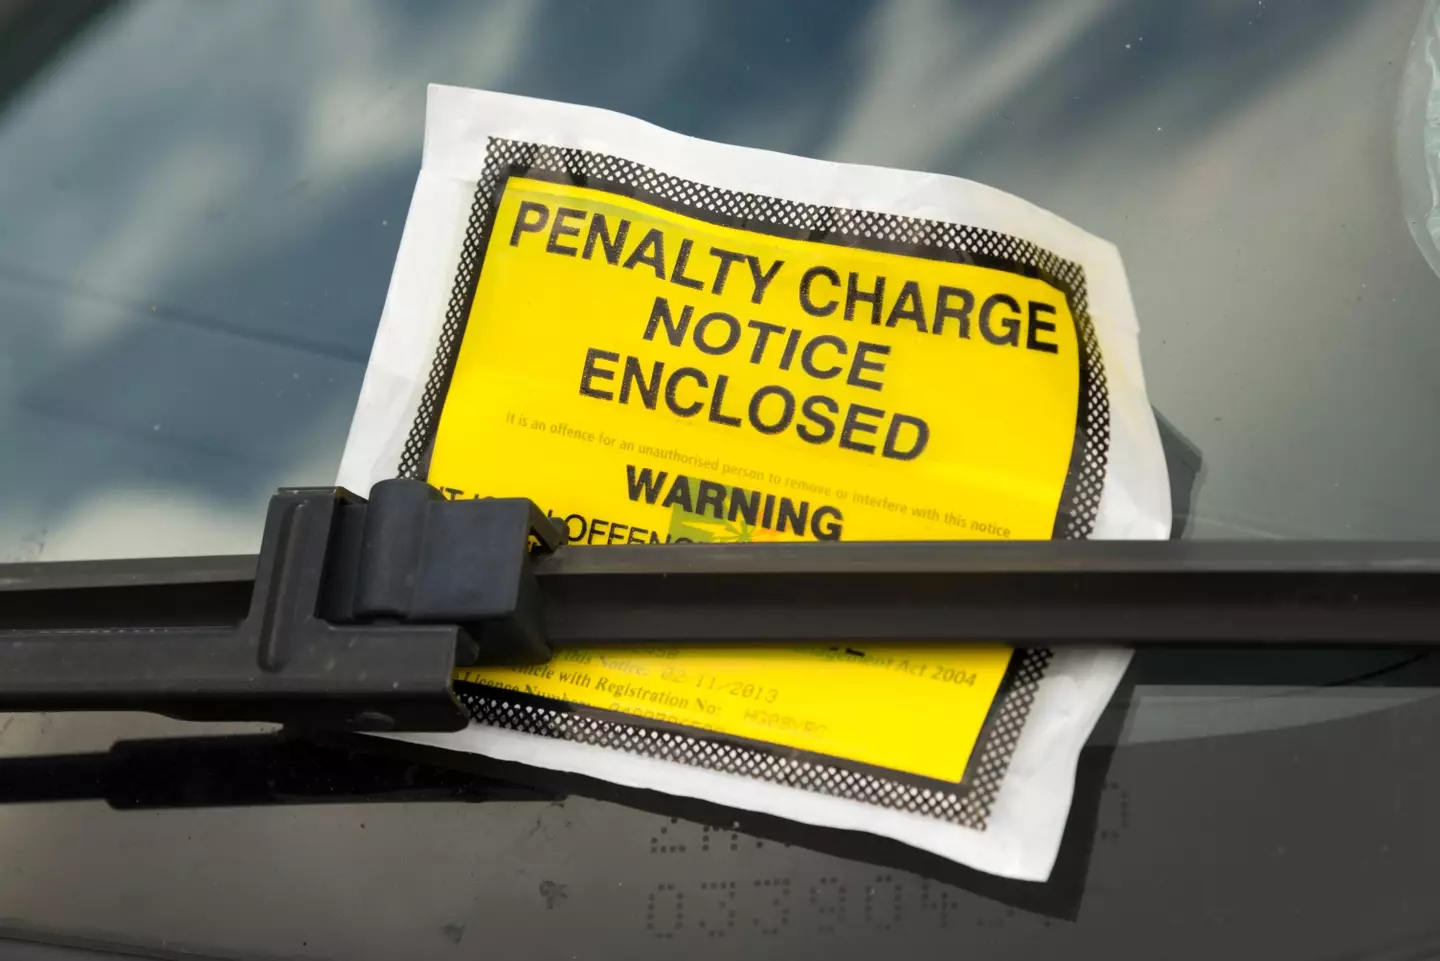 The driver was fined £1,026 after disputing the original ticket in court.